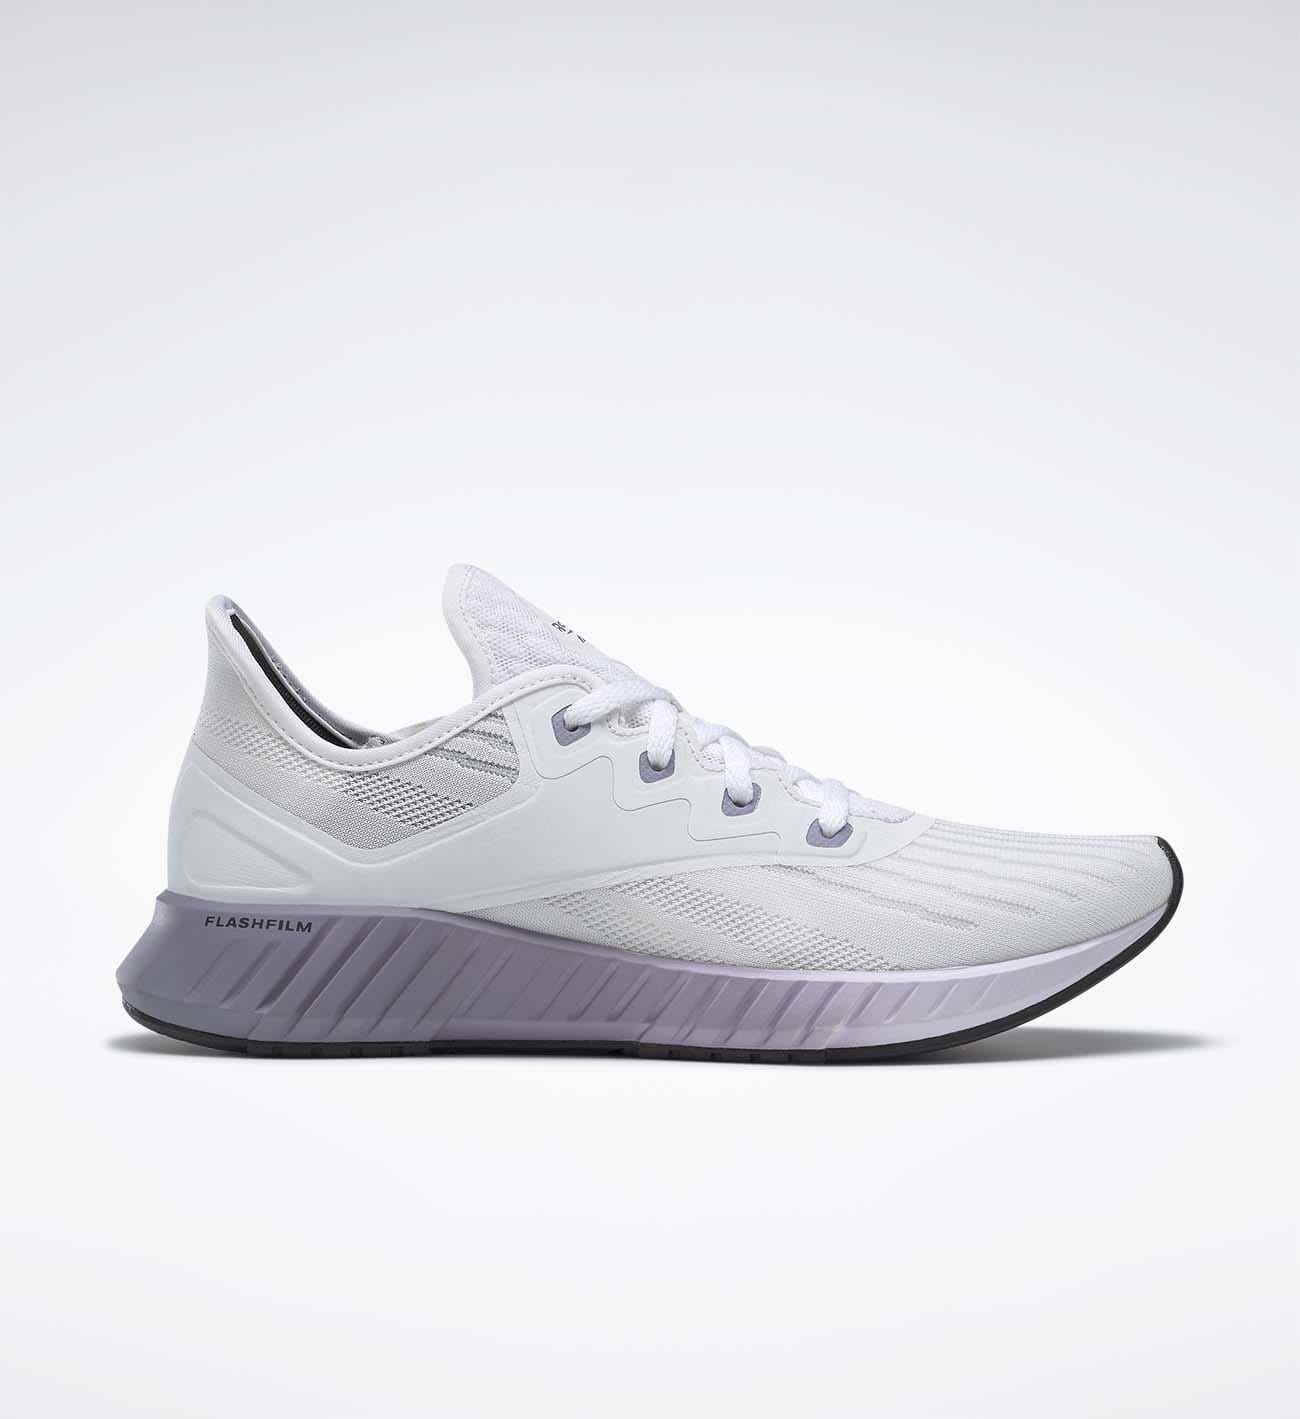 all white womens running shoes